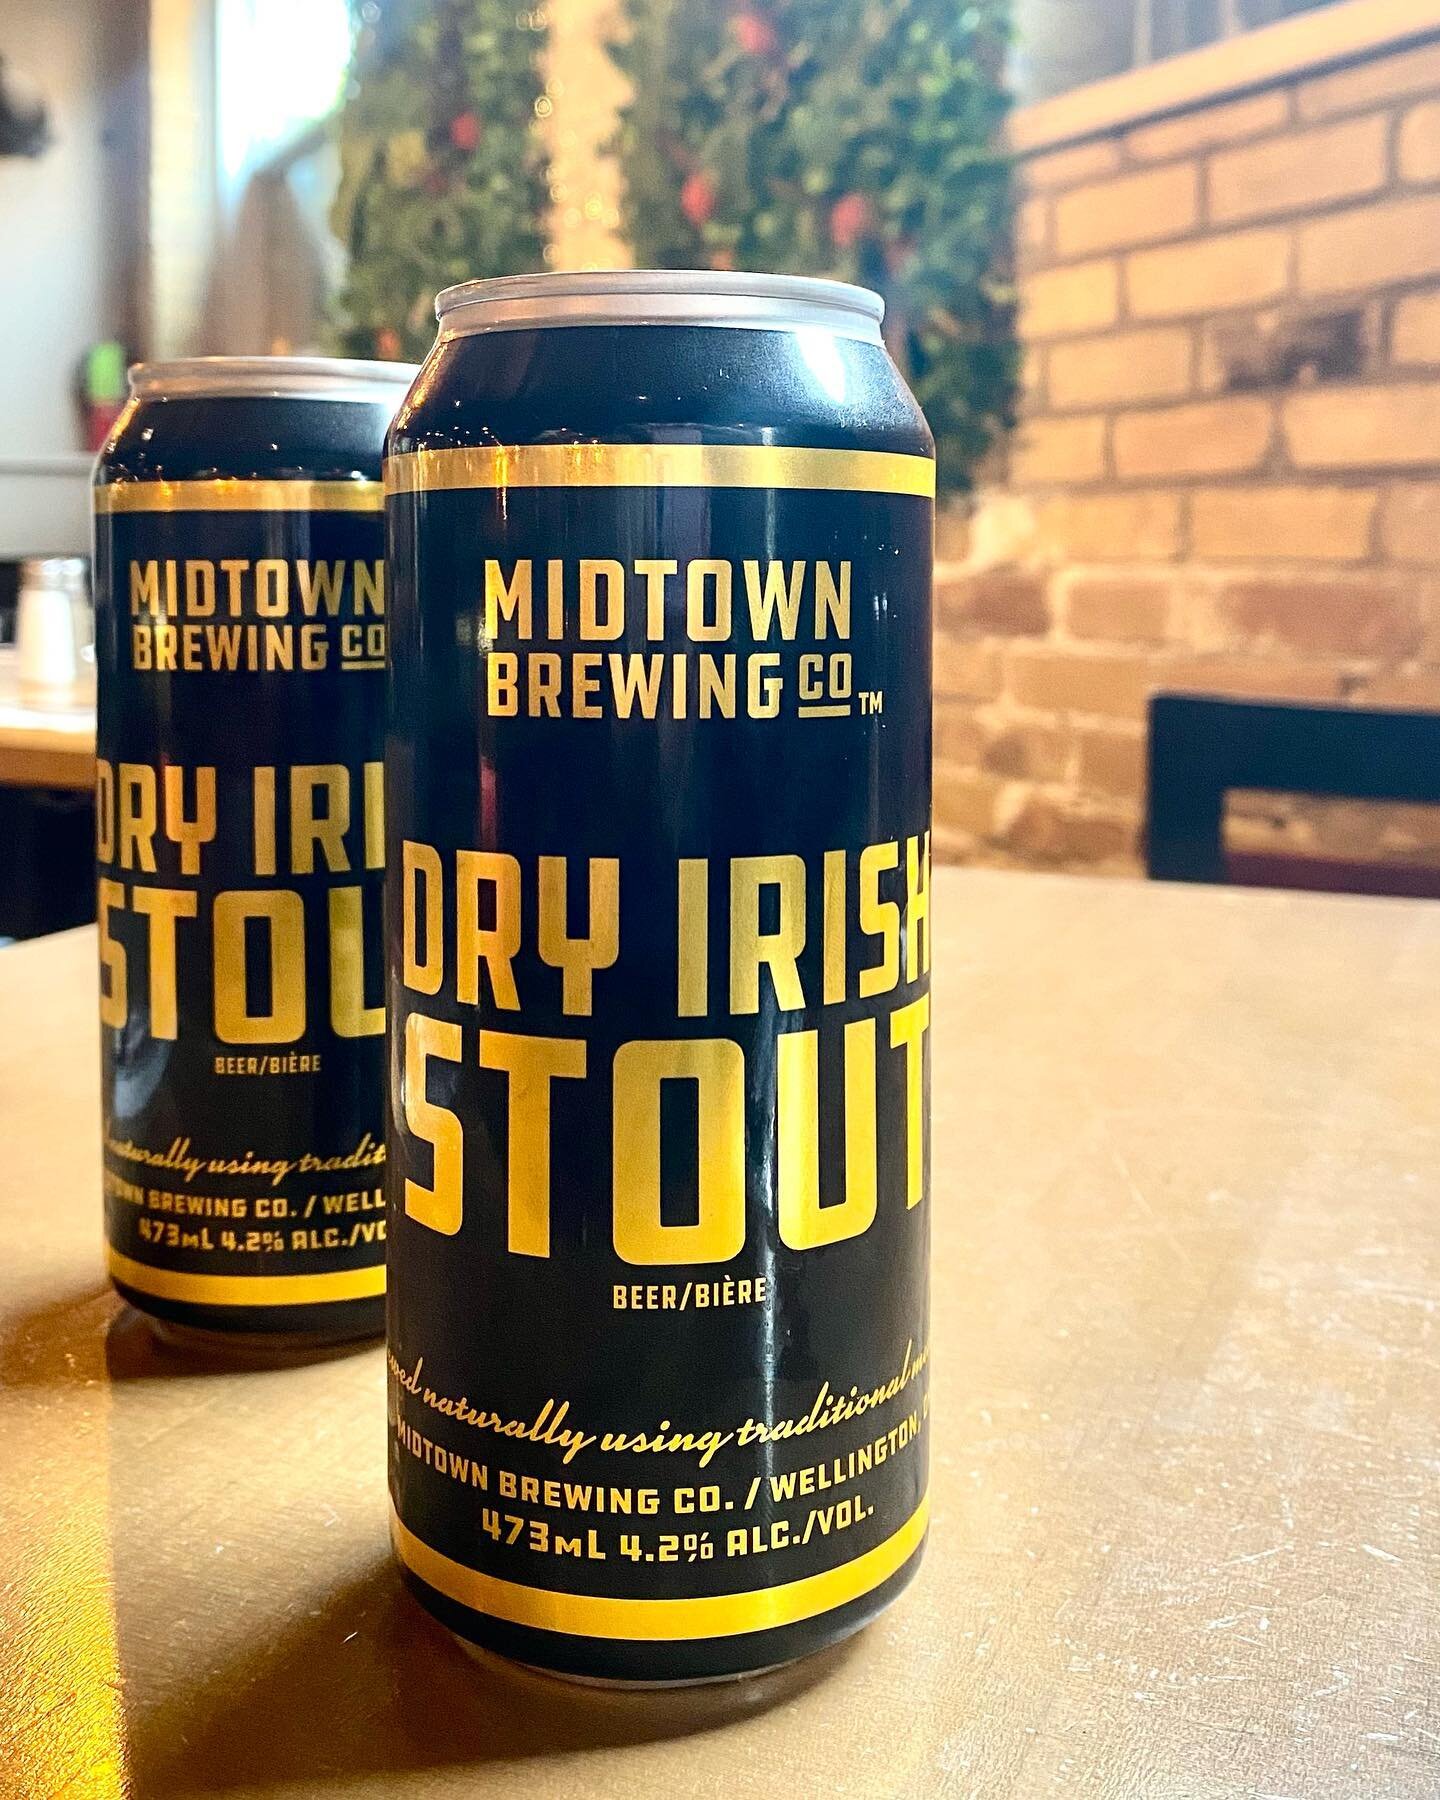 It&rsquo;s Stout Season!! Try this delicious Dry Irish Stout by Midtown Brewing, 4.2% available in LCBO&rsquo;s! More Midtown beers available at the Craft Brasserie &amp; Grille in Liberty Village!